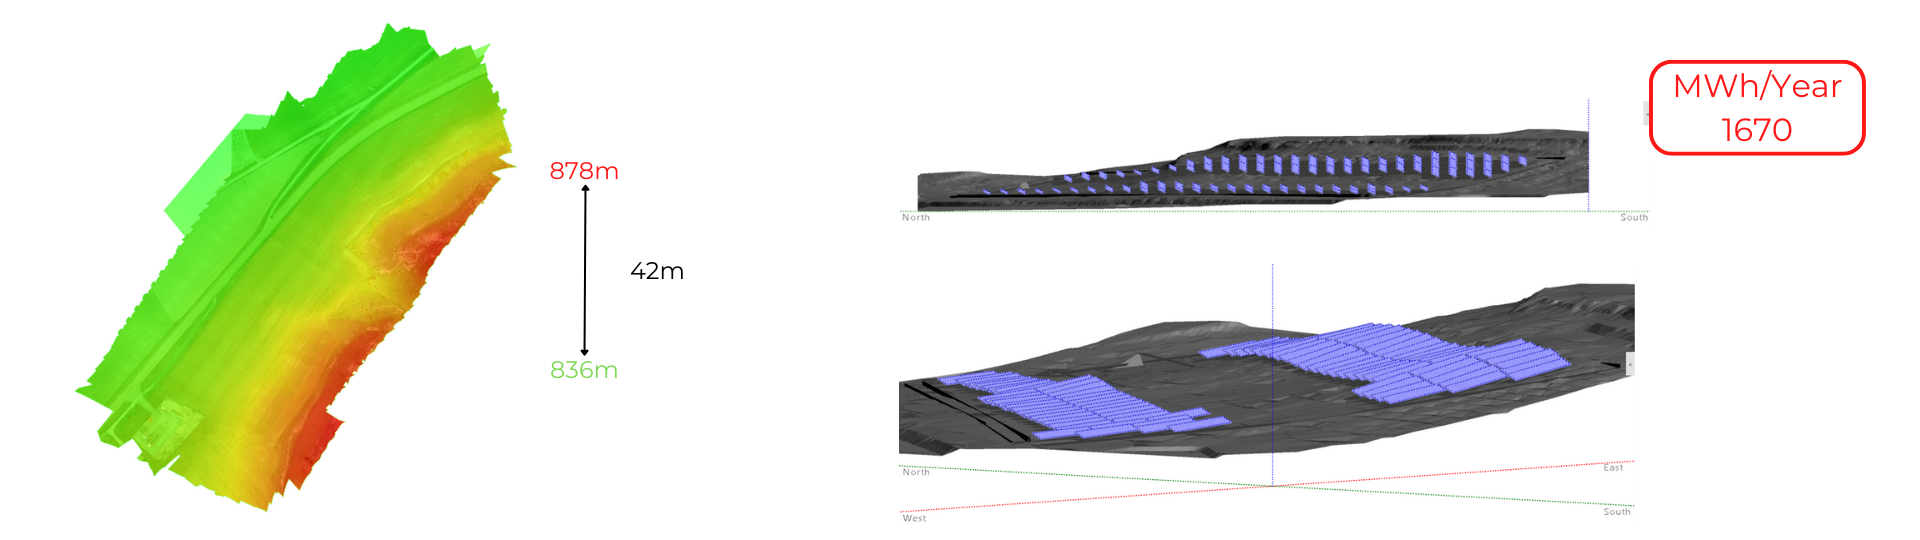 Image of the initial design updated with drone topography